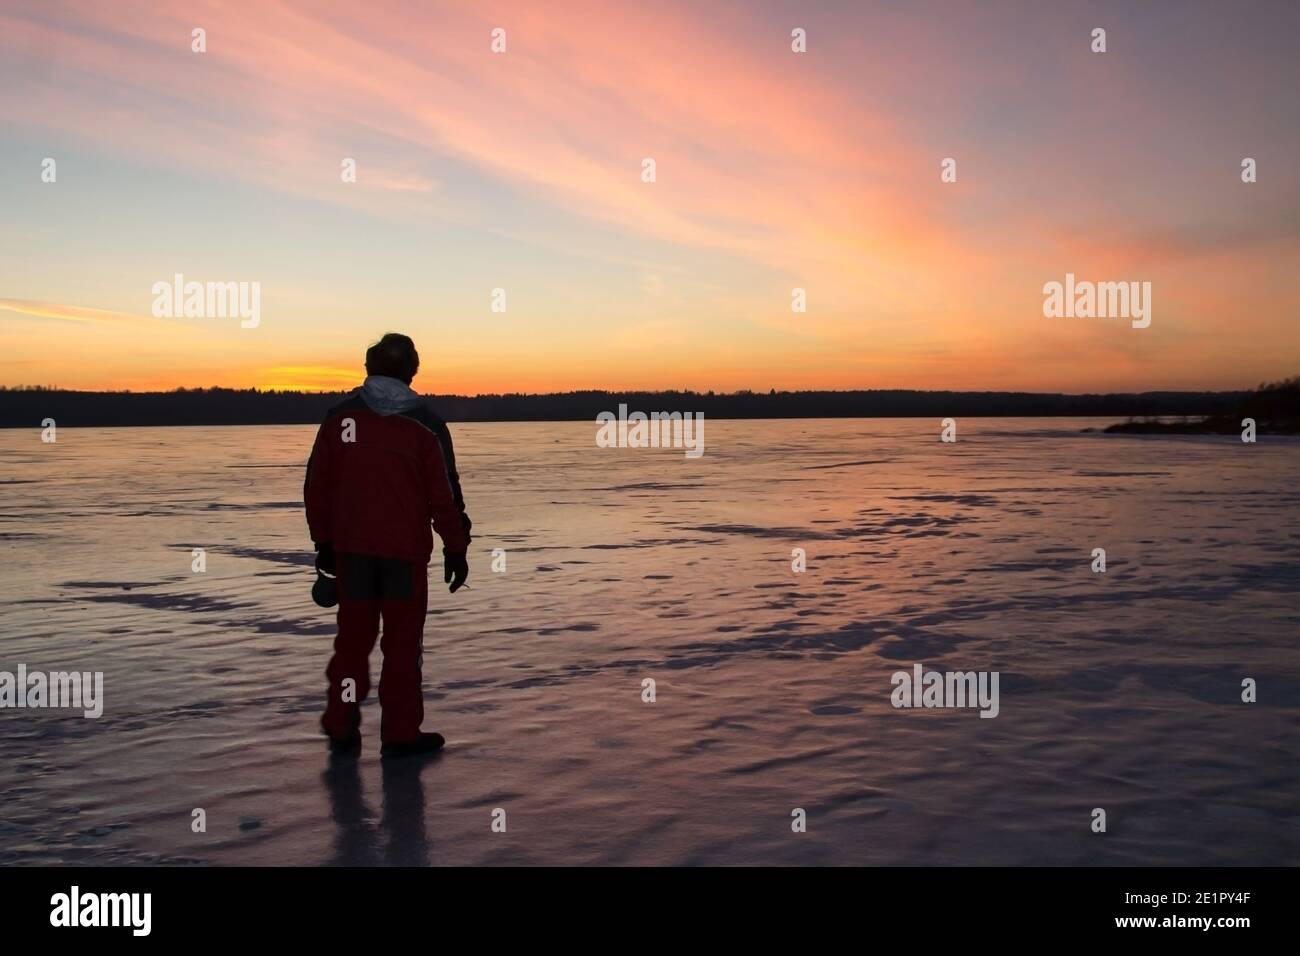 Silhouette of a man on the background of an ice-covered lake at sunset. Stock Photo